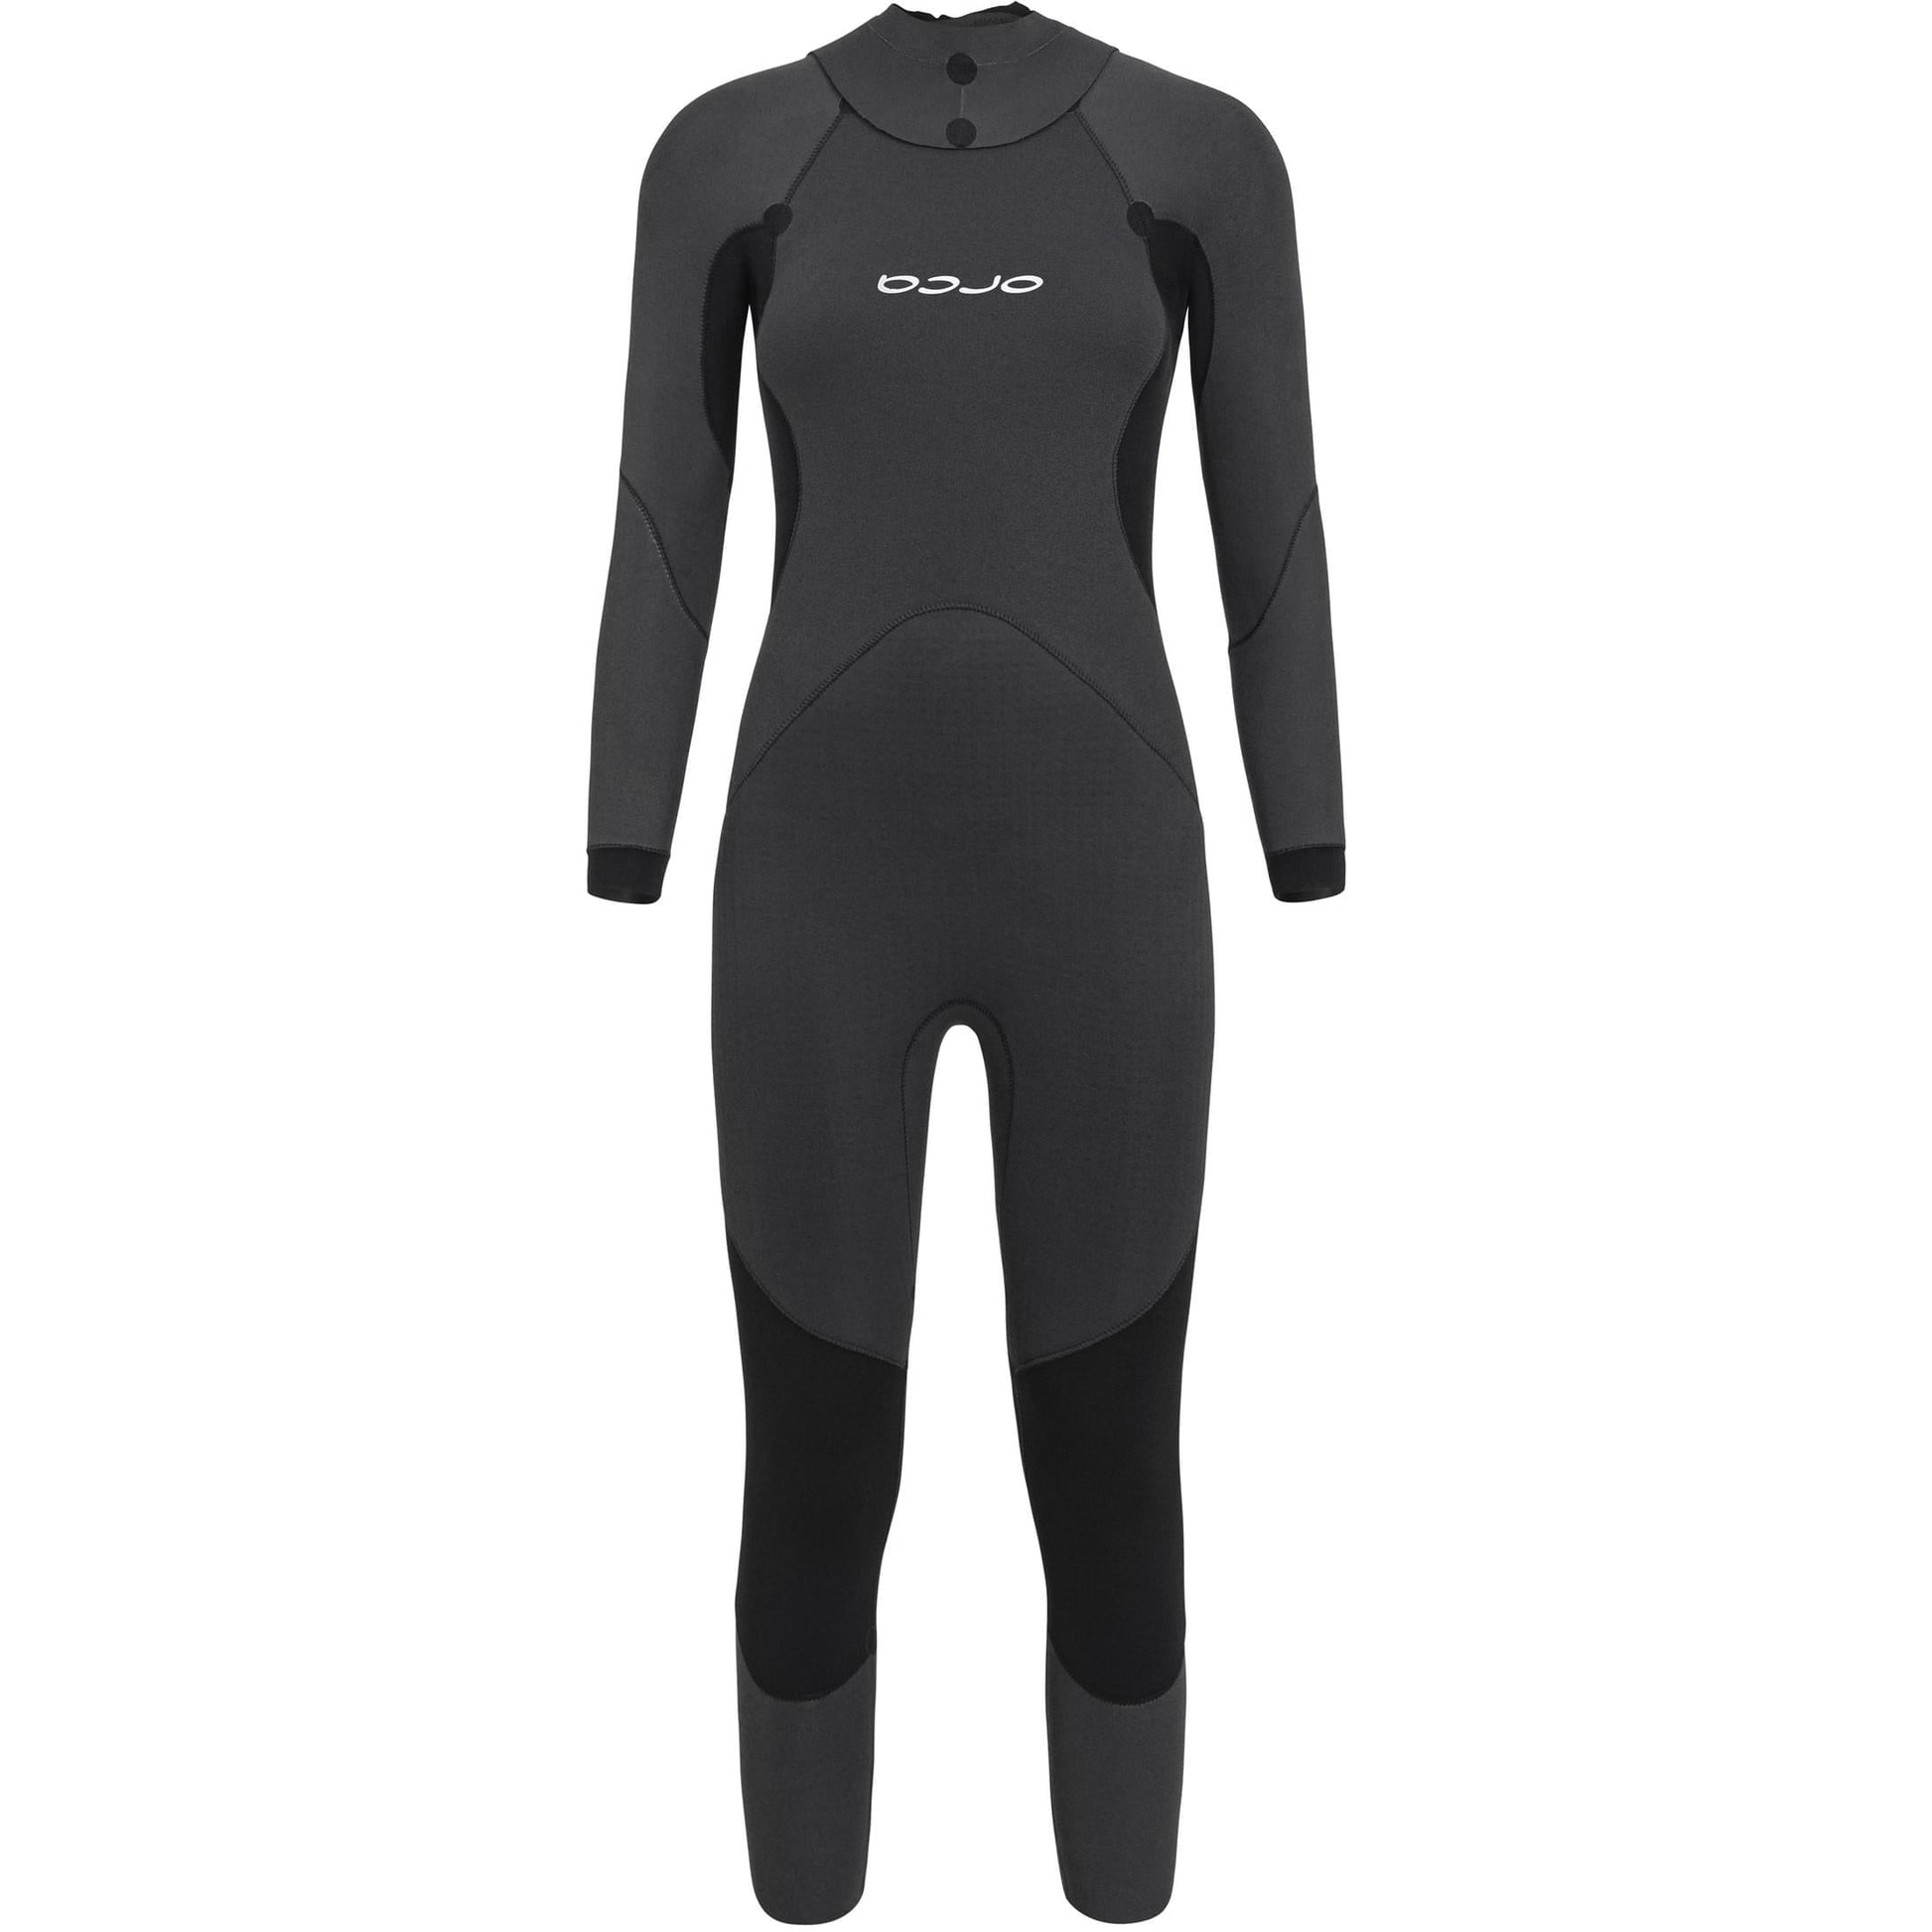 Orca Zeal Hi Vis Openwater Wetsuit Nn6Z Inside Front - Front View